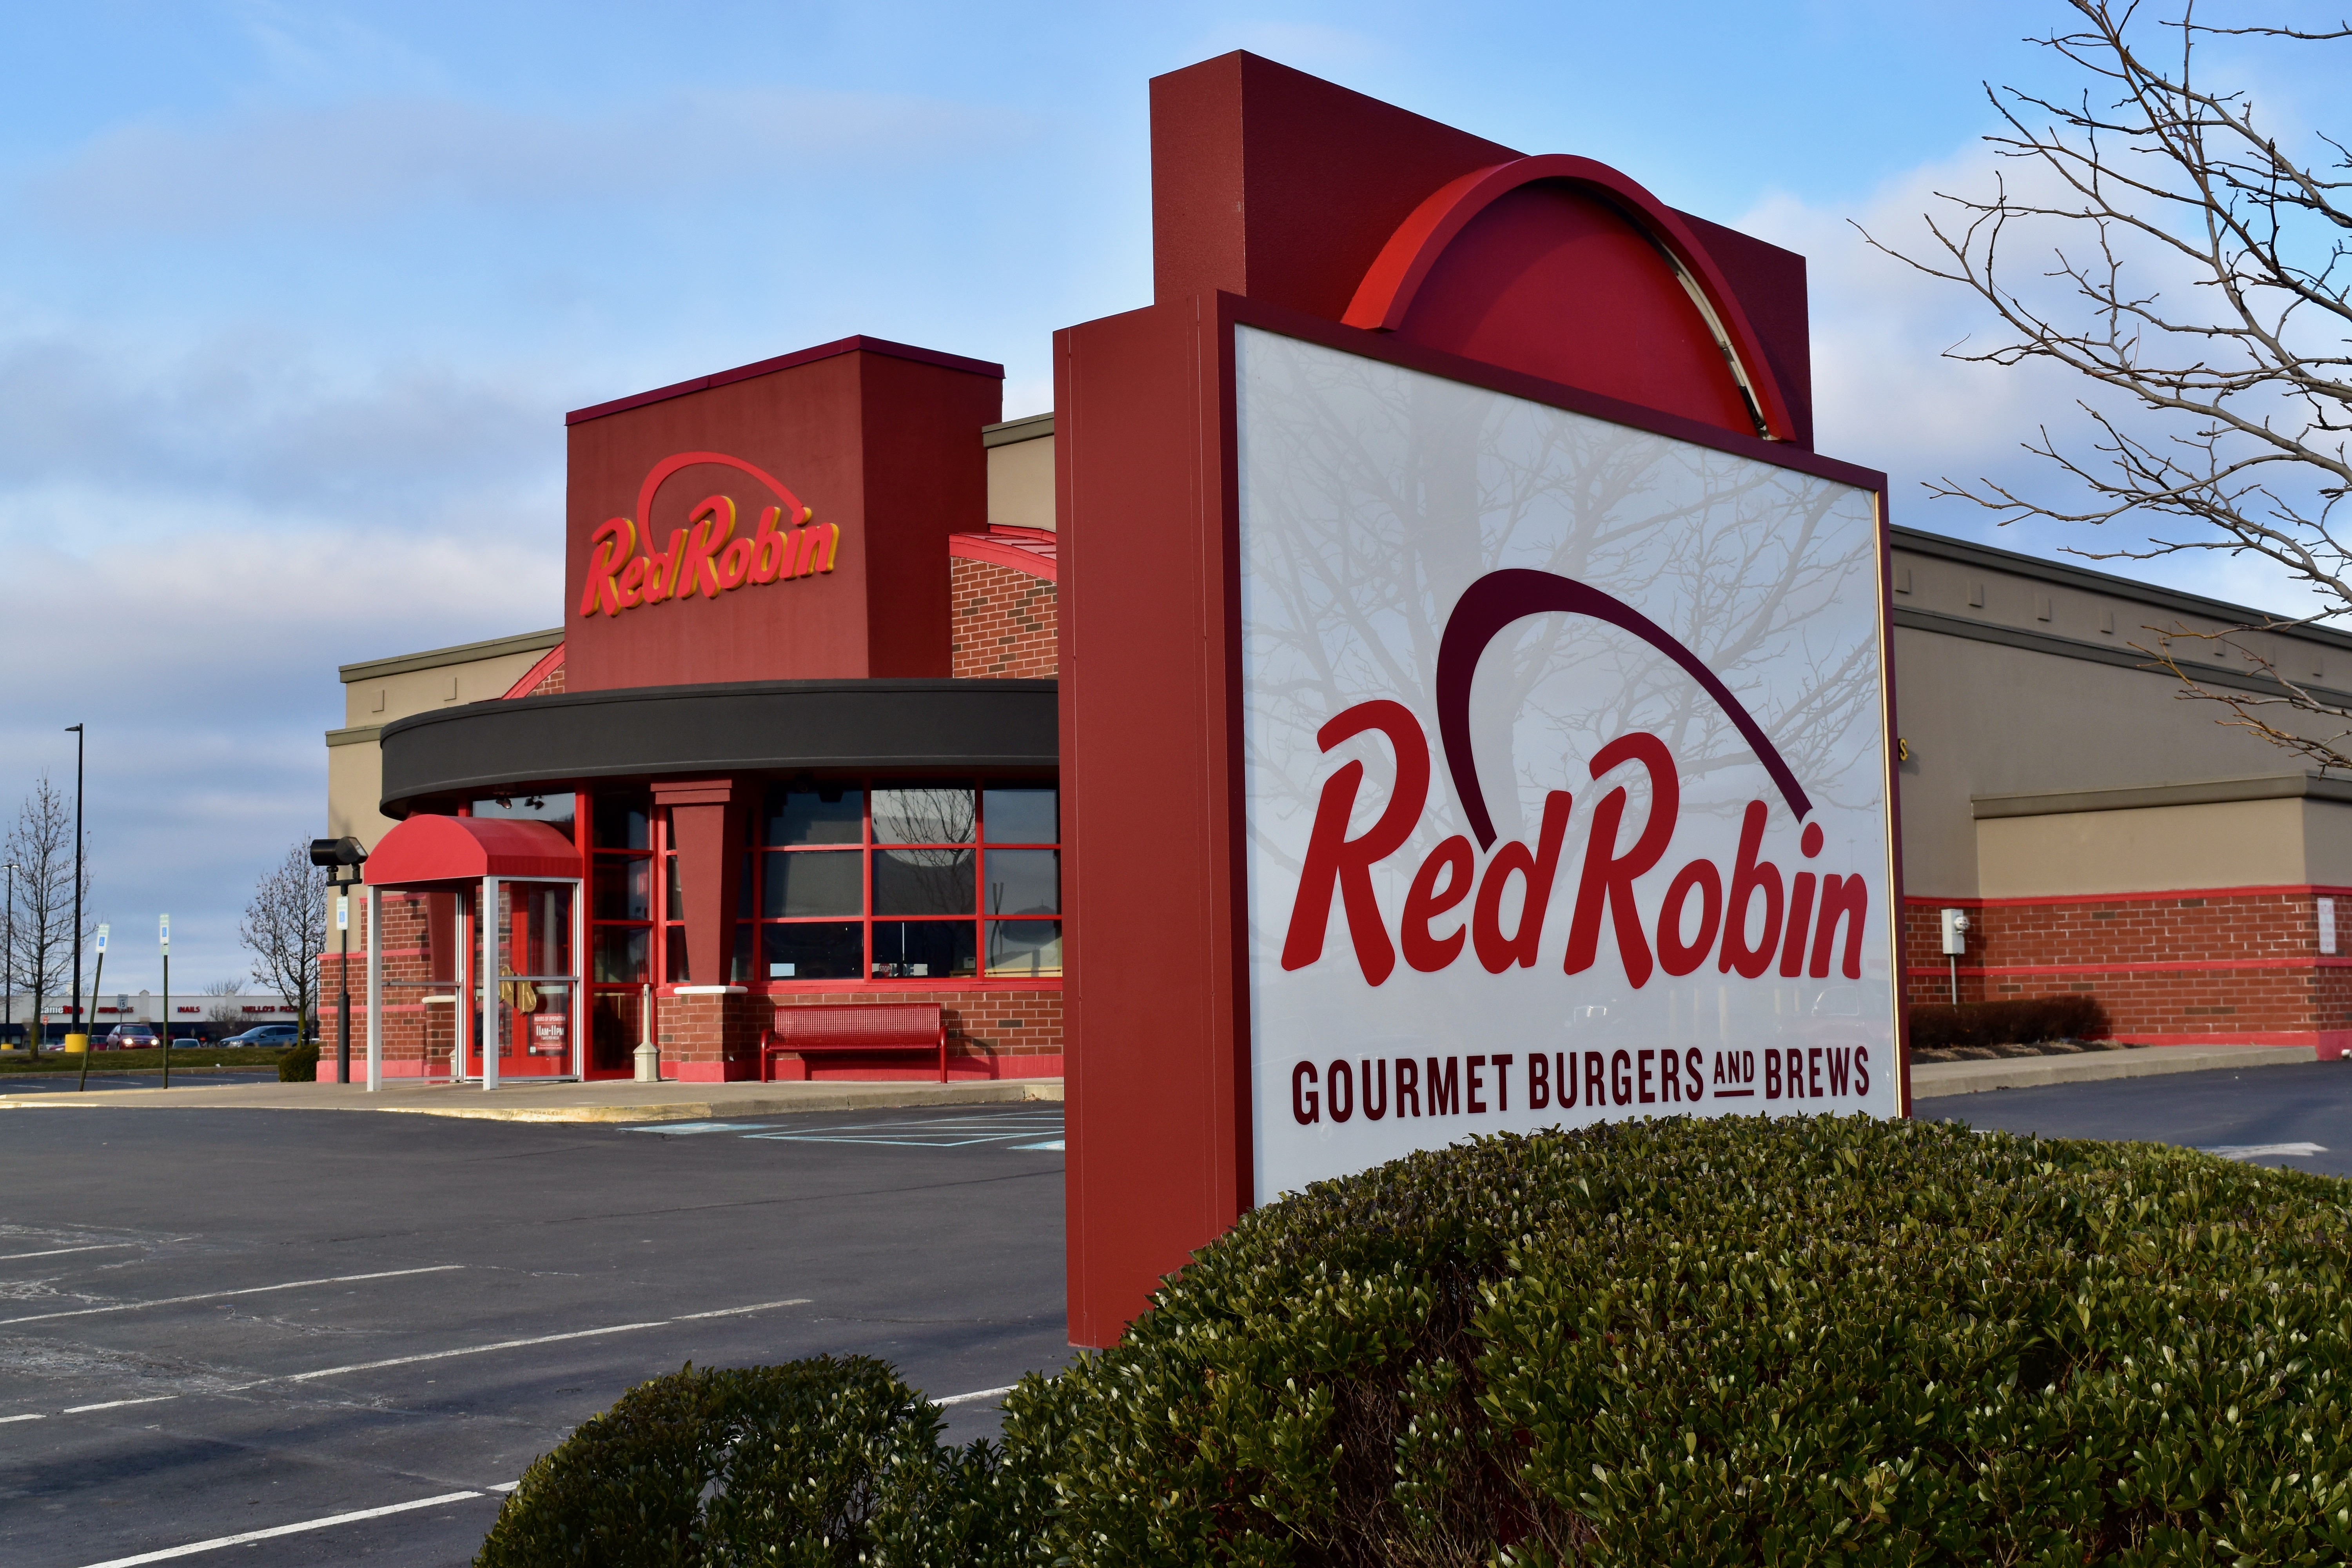 Exterior of the Red Robin Restaurant in Wilkes-Barre, PA